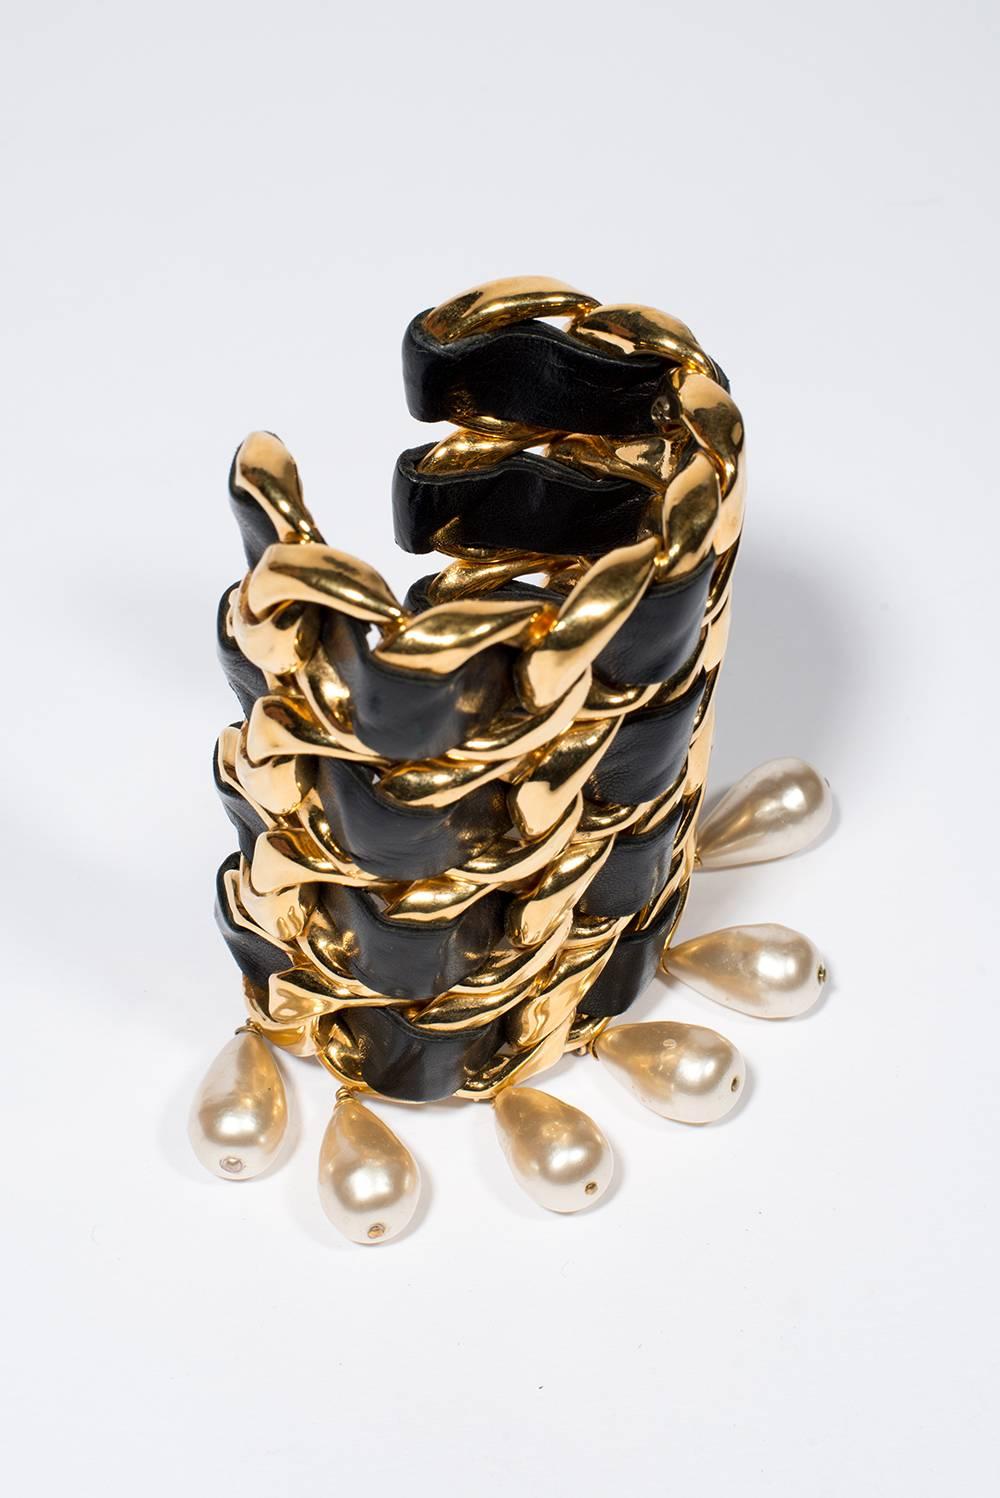 Chanel Vintage Amazing Cuff  1988-1992

golden metal cuff bracelet with black leather entrelat and ranking false baroque pearls.

You have some pictures from the 1991 Winter - Fall with Linda Evangelista 
photograph : Karl Lagerfeld 

the